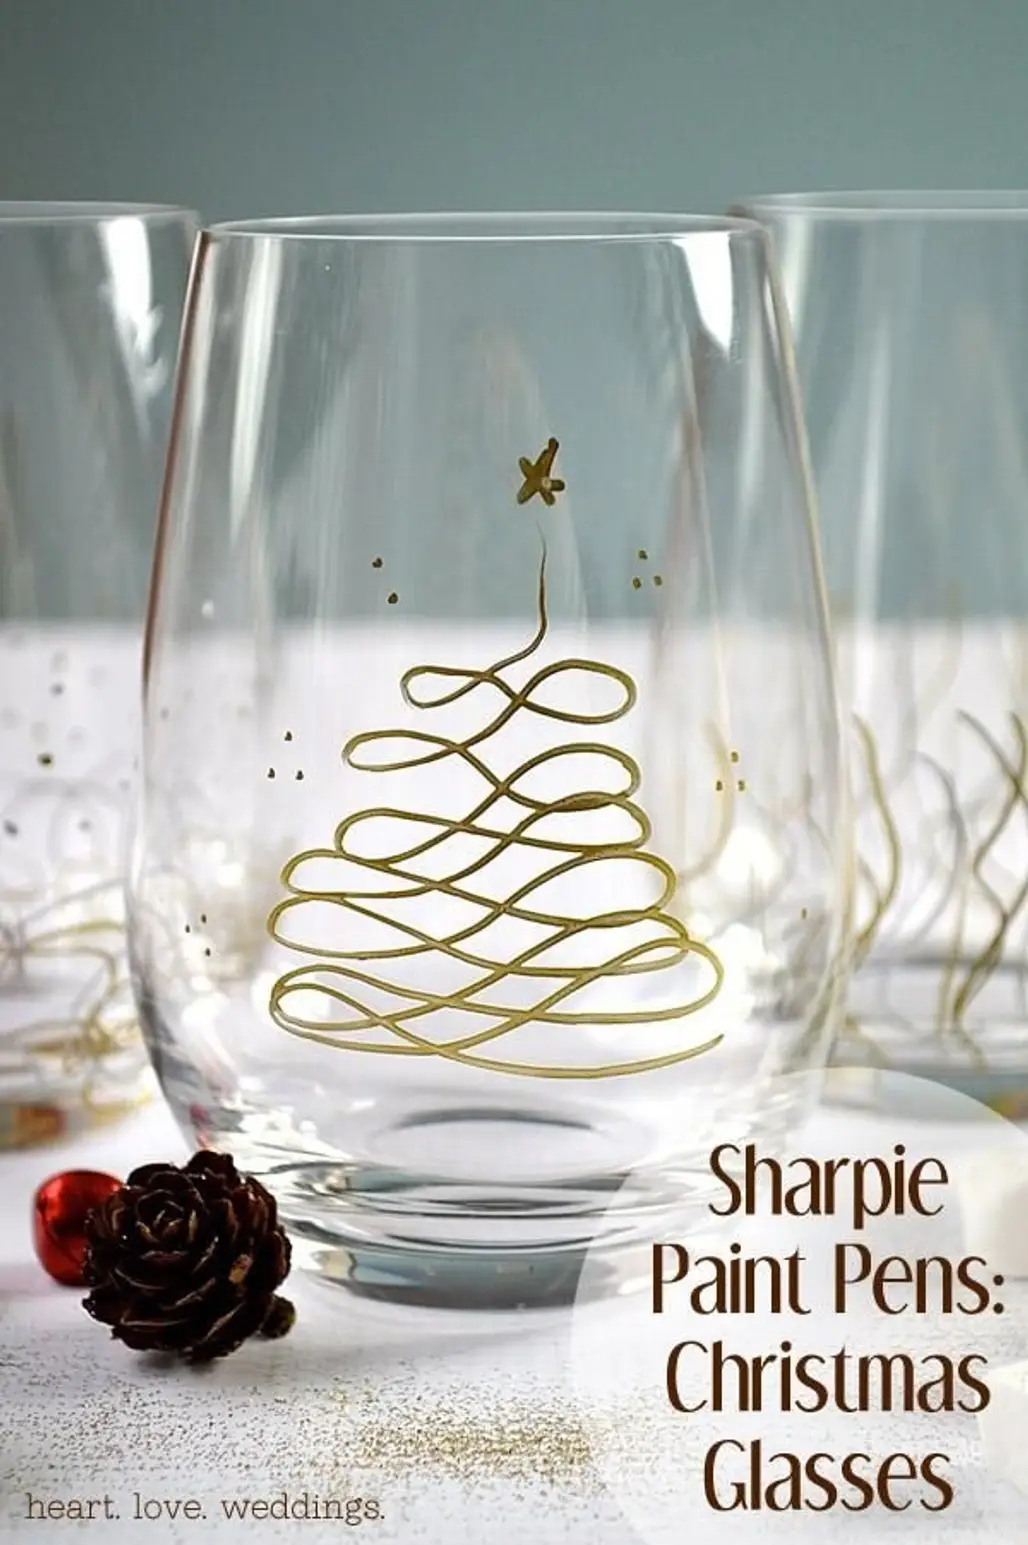 Personalized Christmas Glasses